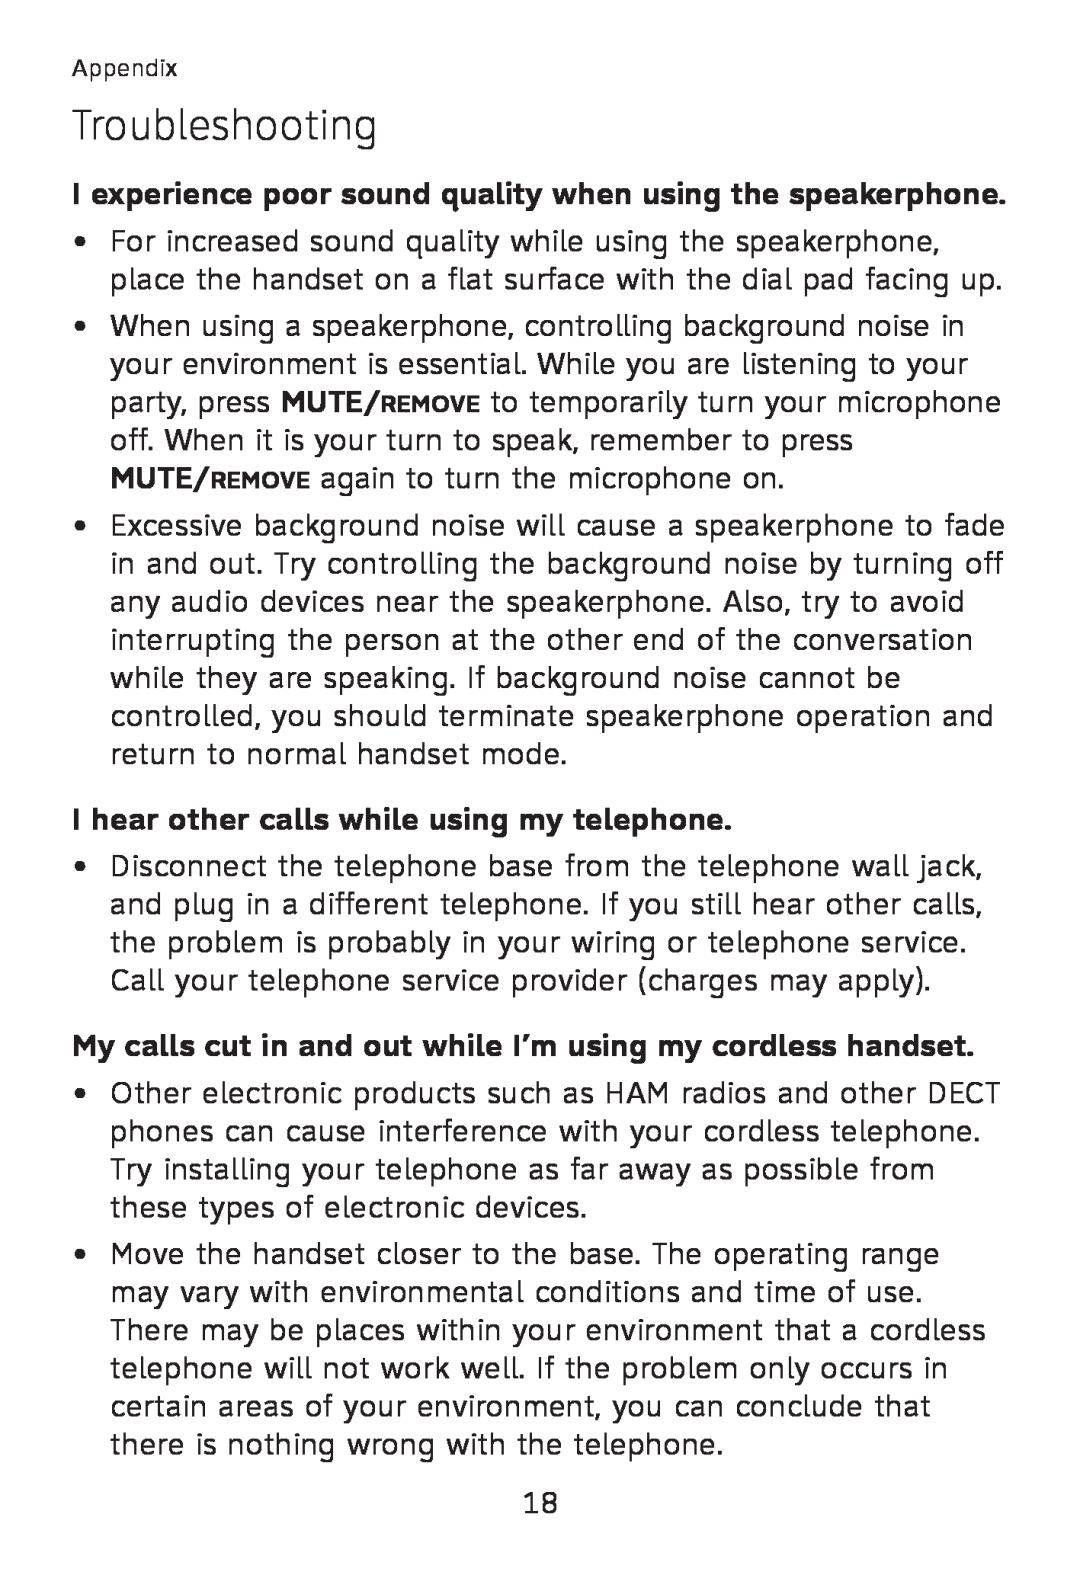 AT&T TL32200 I experience poor sound quality when using the speakerphone, I hear other calls while using my telephone 